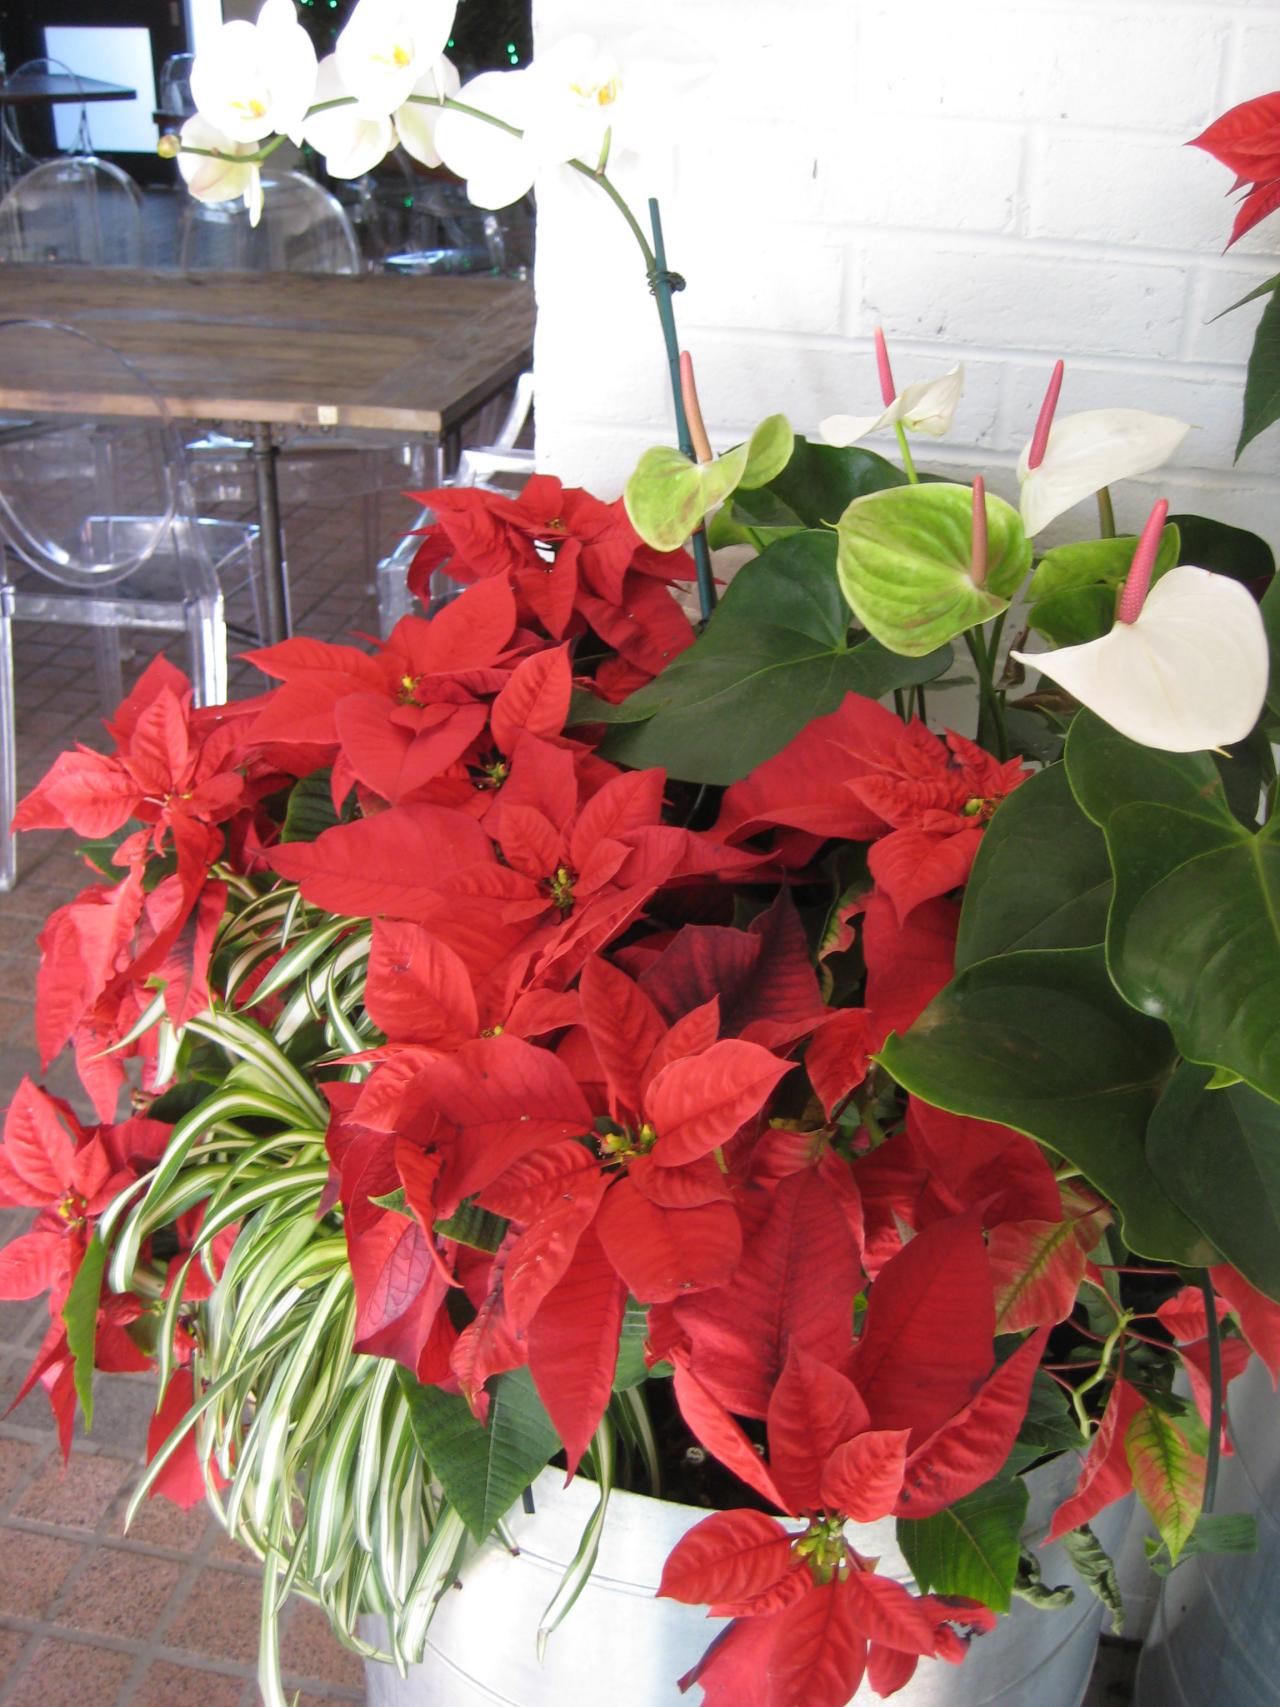 How to care for the poinsettia plant